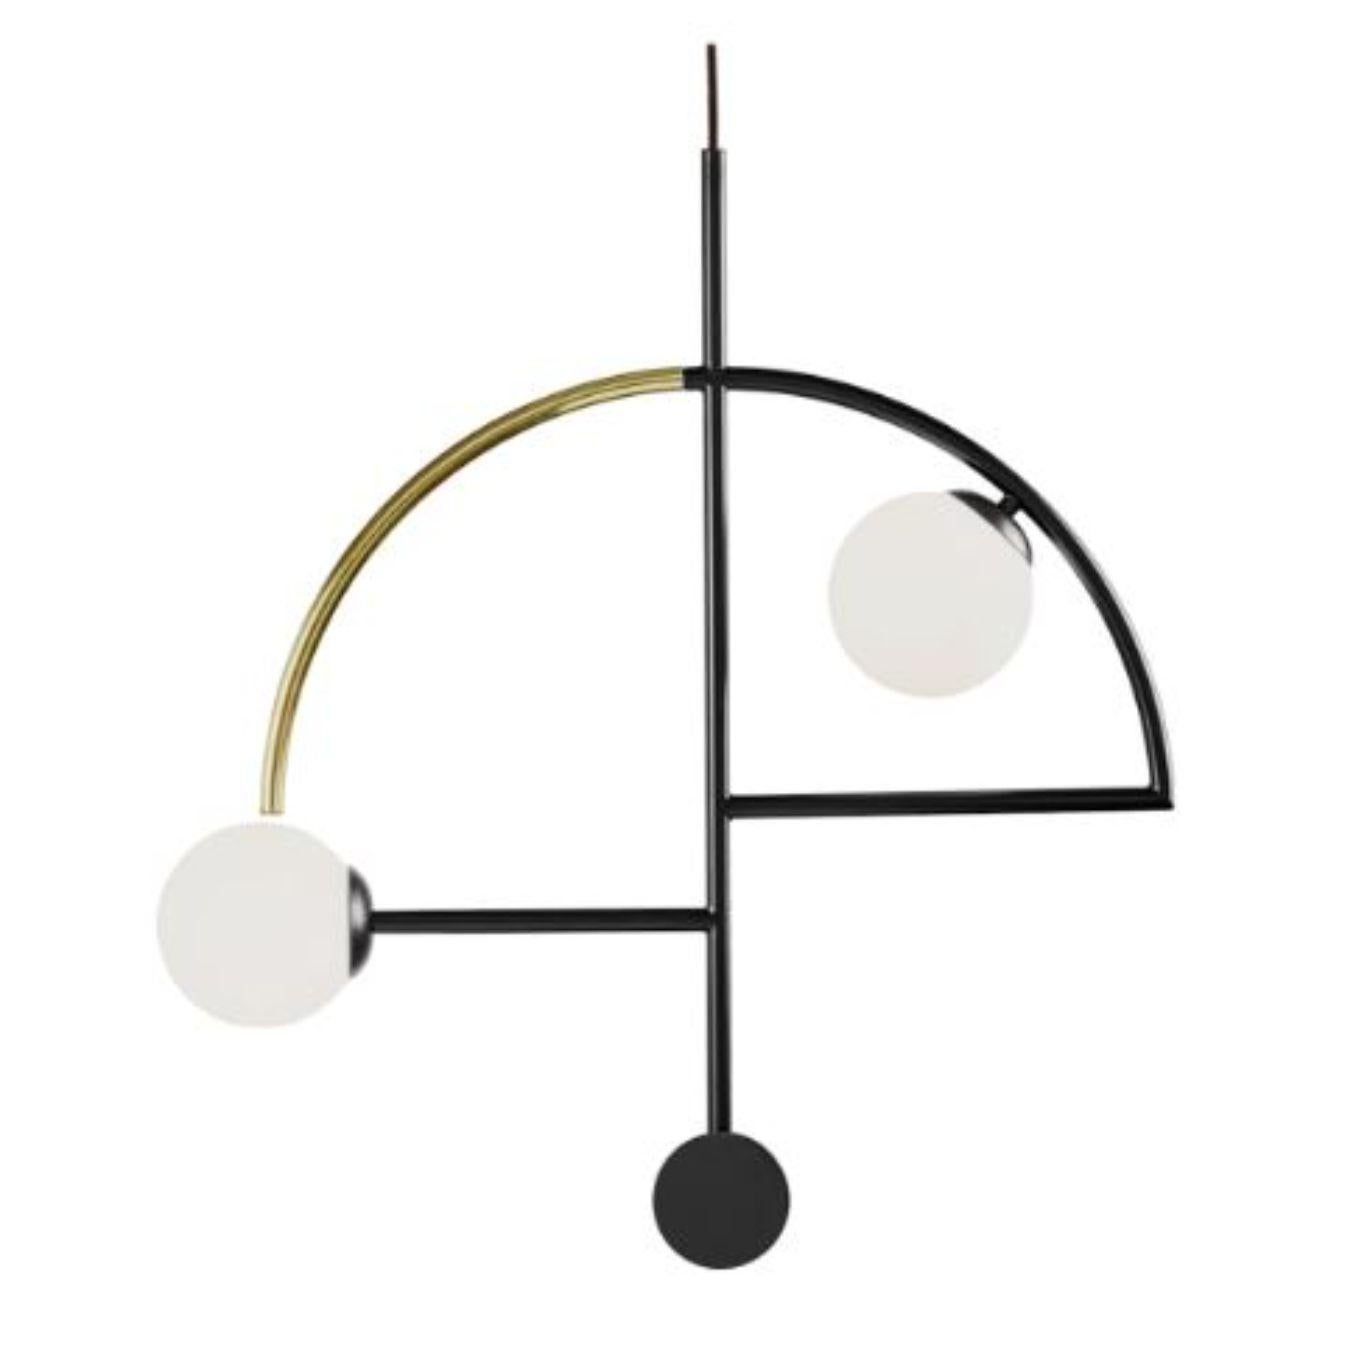 Taupe Helio II Suspension lamp by Dooq
Dimensions: W 35 x D 35 x H 50 cm
Materials: lacquered metal, brass/nickel.
Also available in different colors and materials. 

Information:
230V/50Hz
2 x max. G9
4W LED

120V/60Hz
2 x max. G9
4W LED

All our